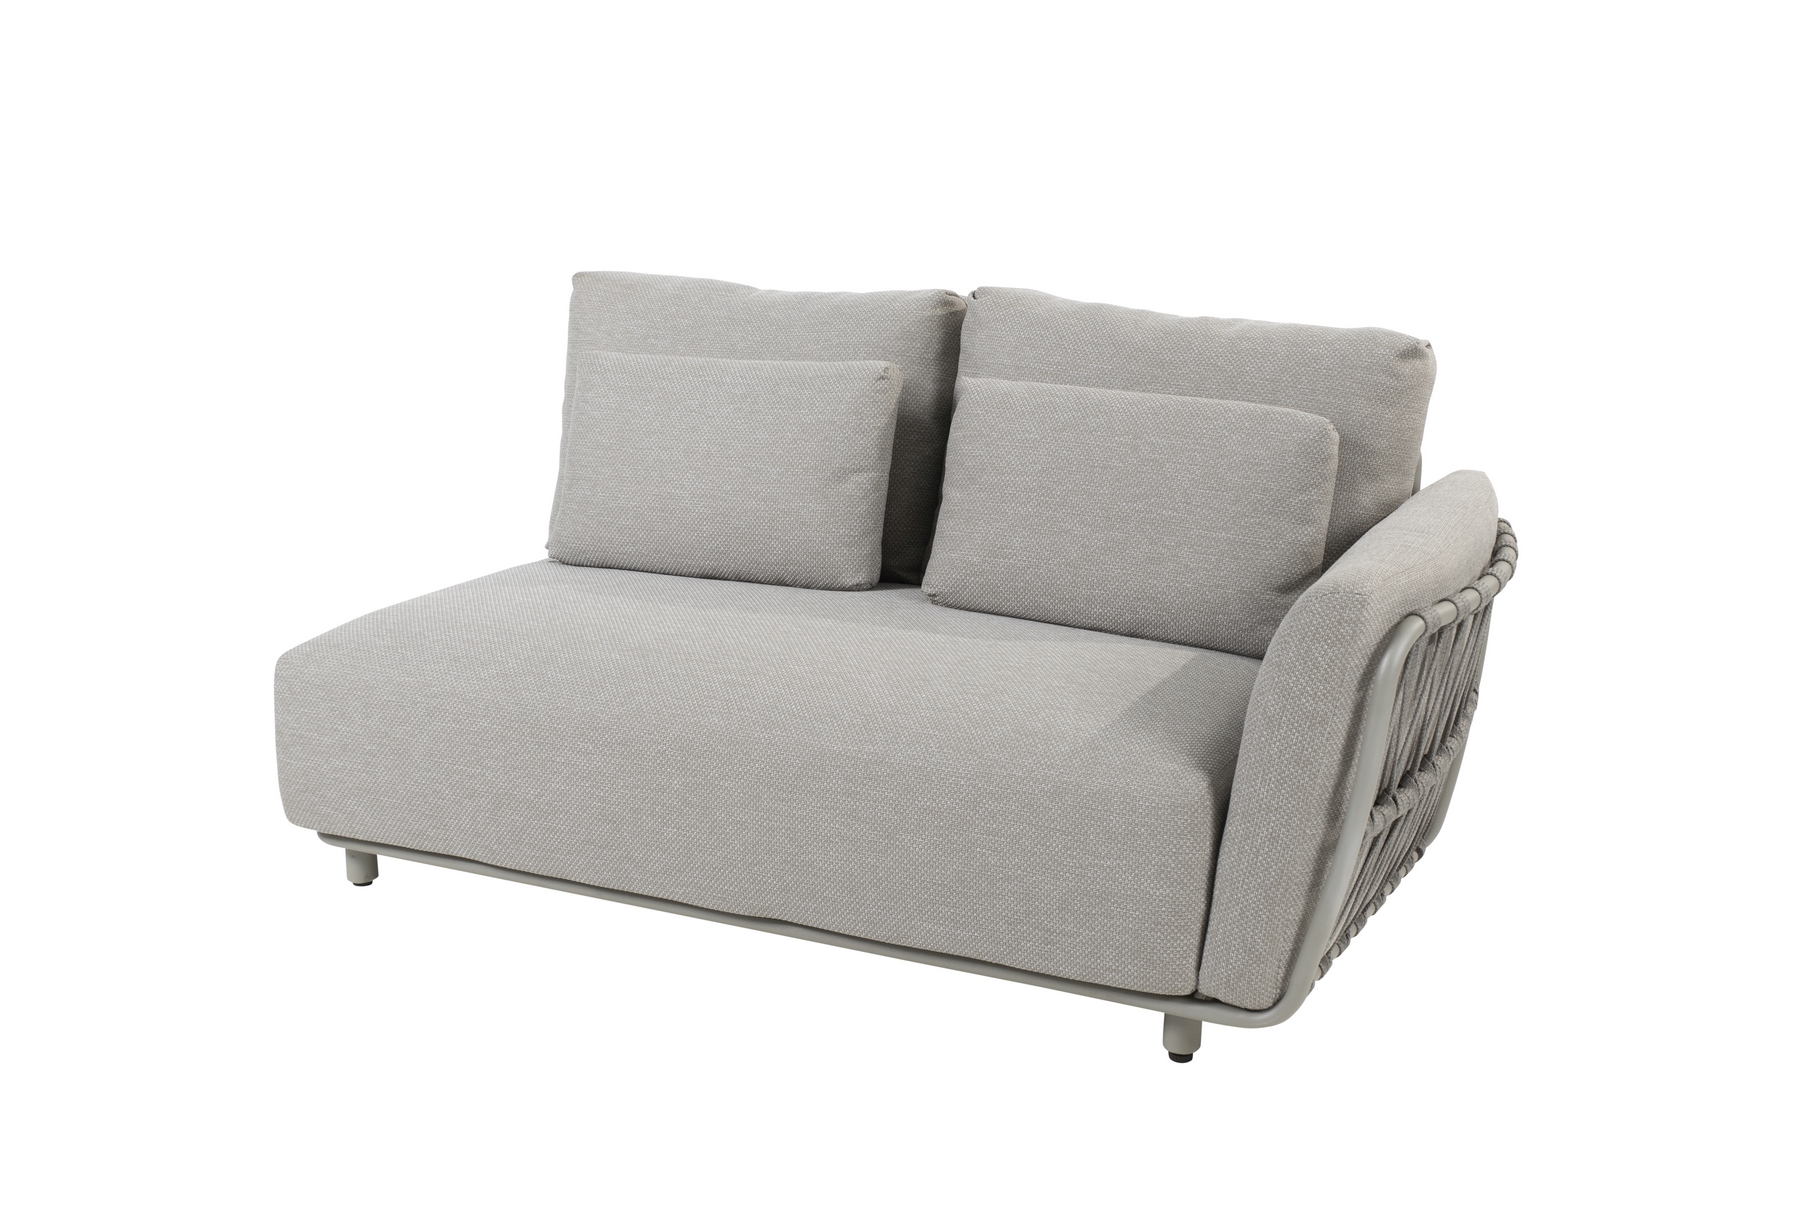 213899__Evolve_2_seater_left_grey_metalic_with_6_cushions_01.jpg